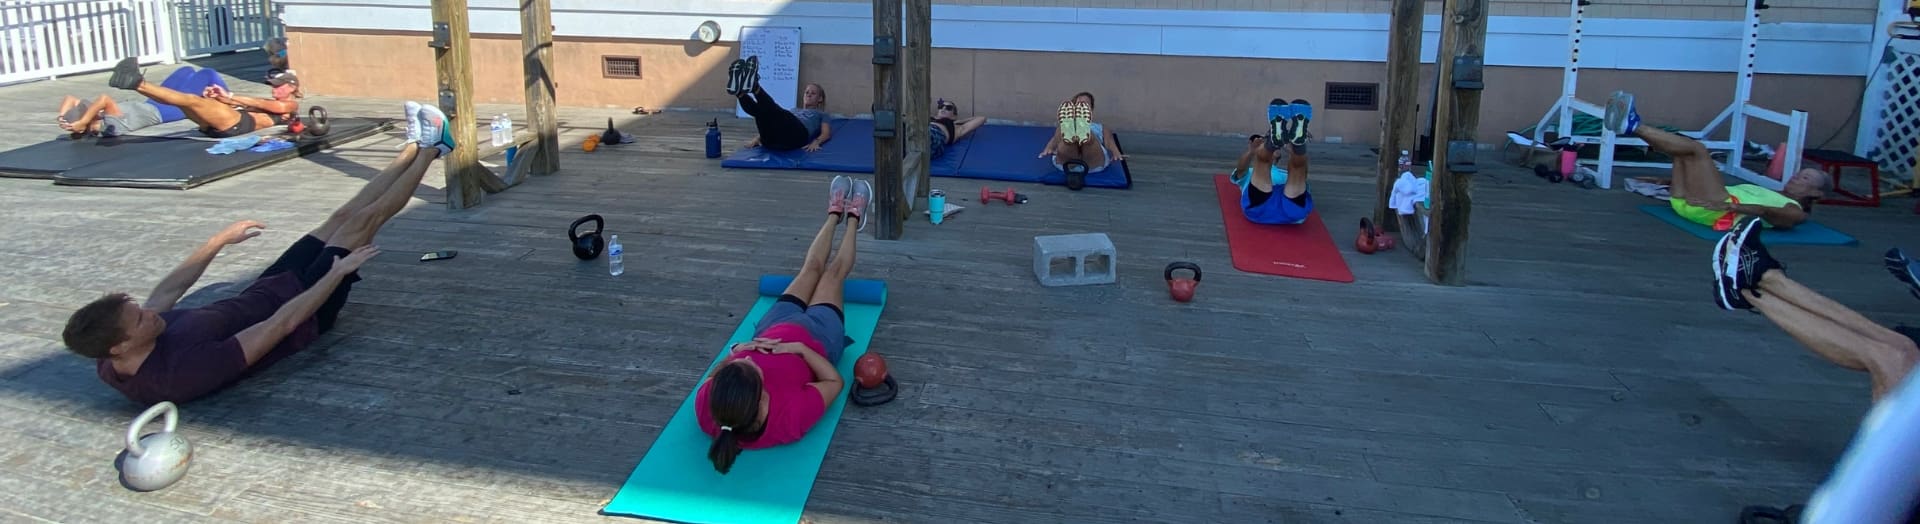 gym members work out on the back deck at inlet fitness during an outdoor cross training fitness class